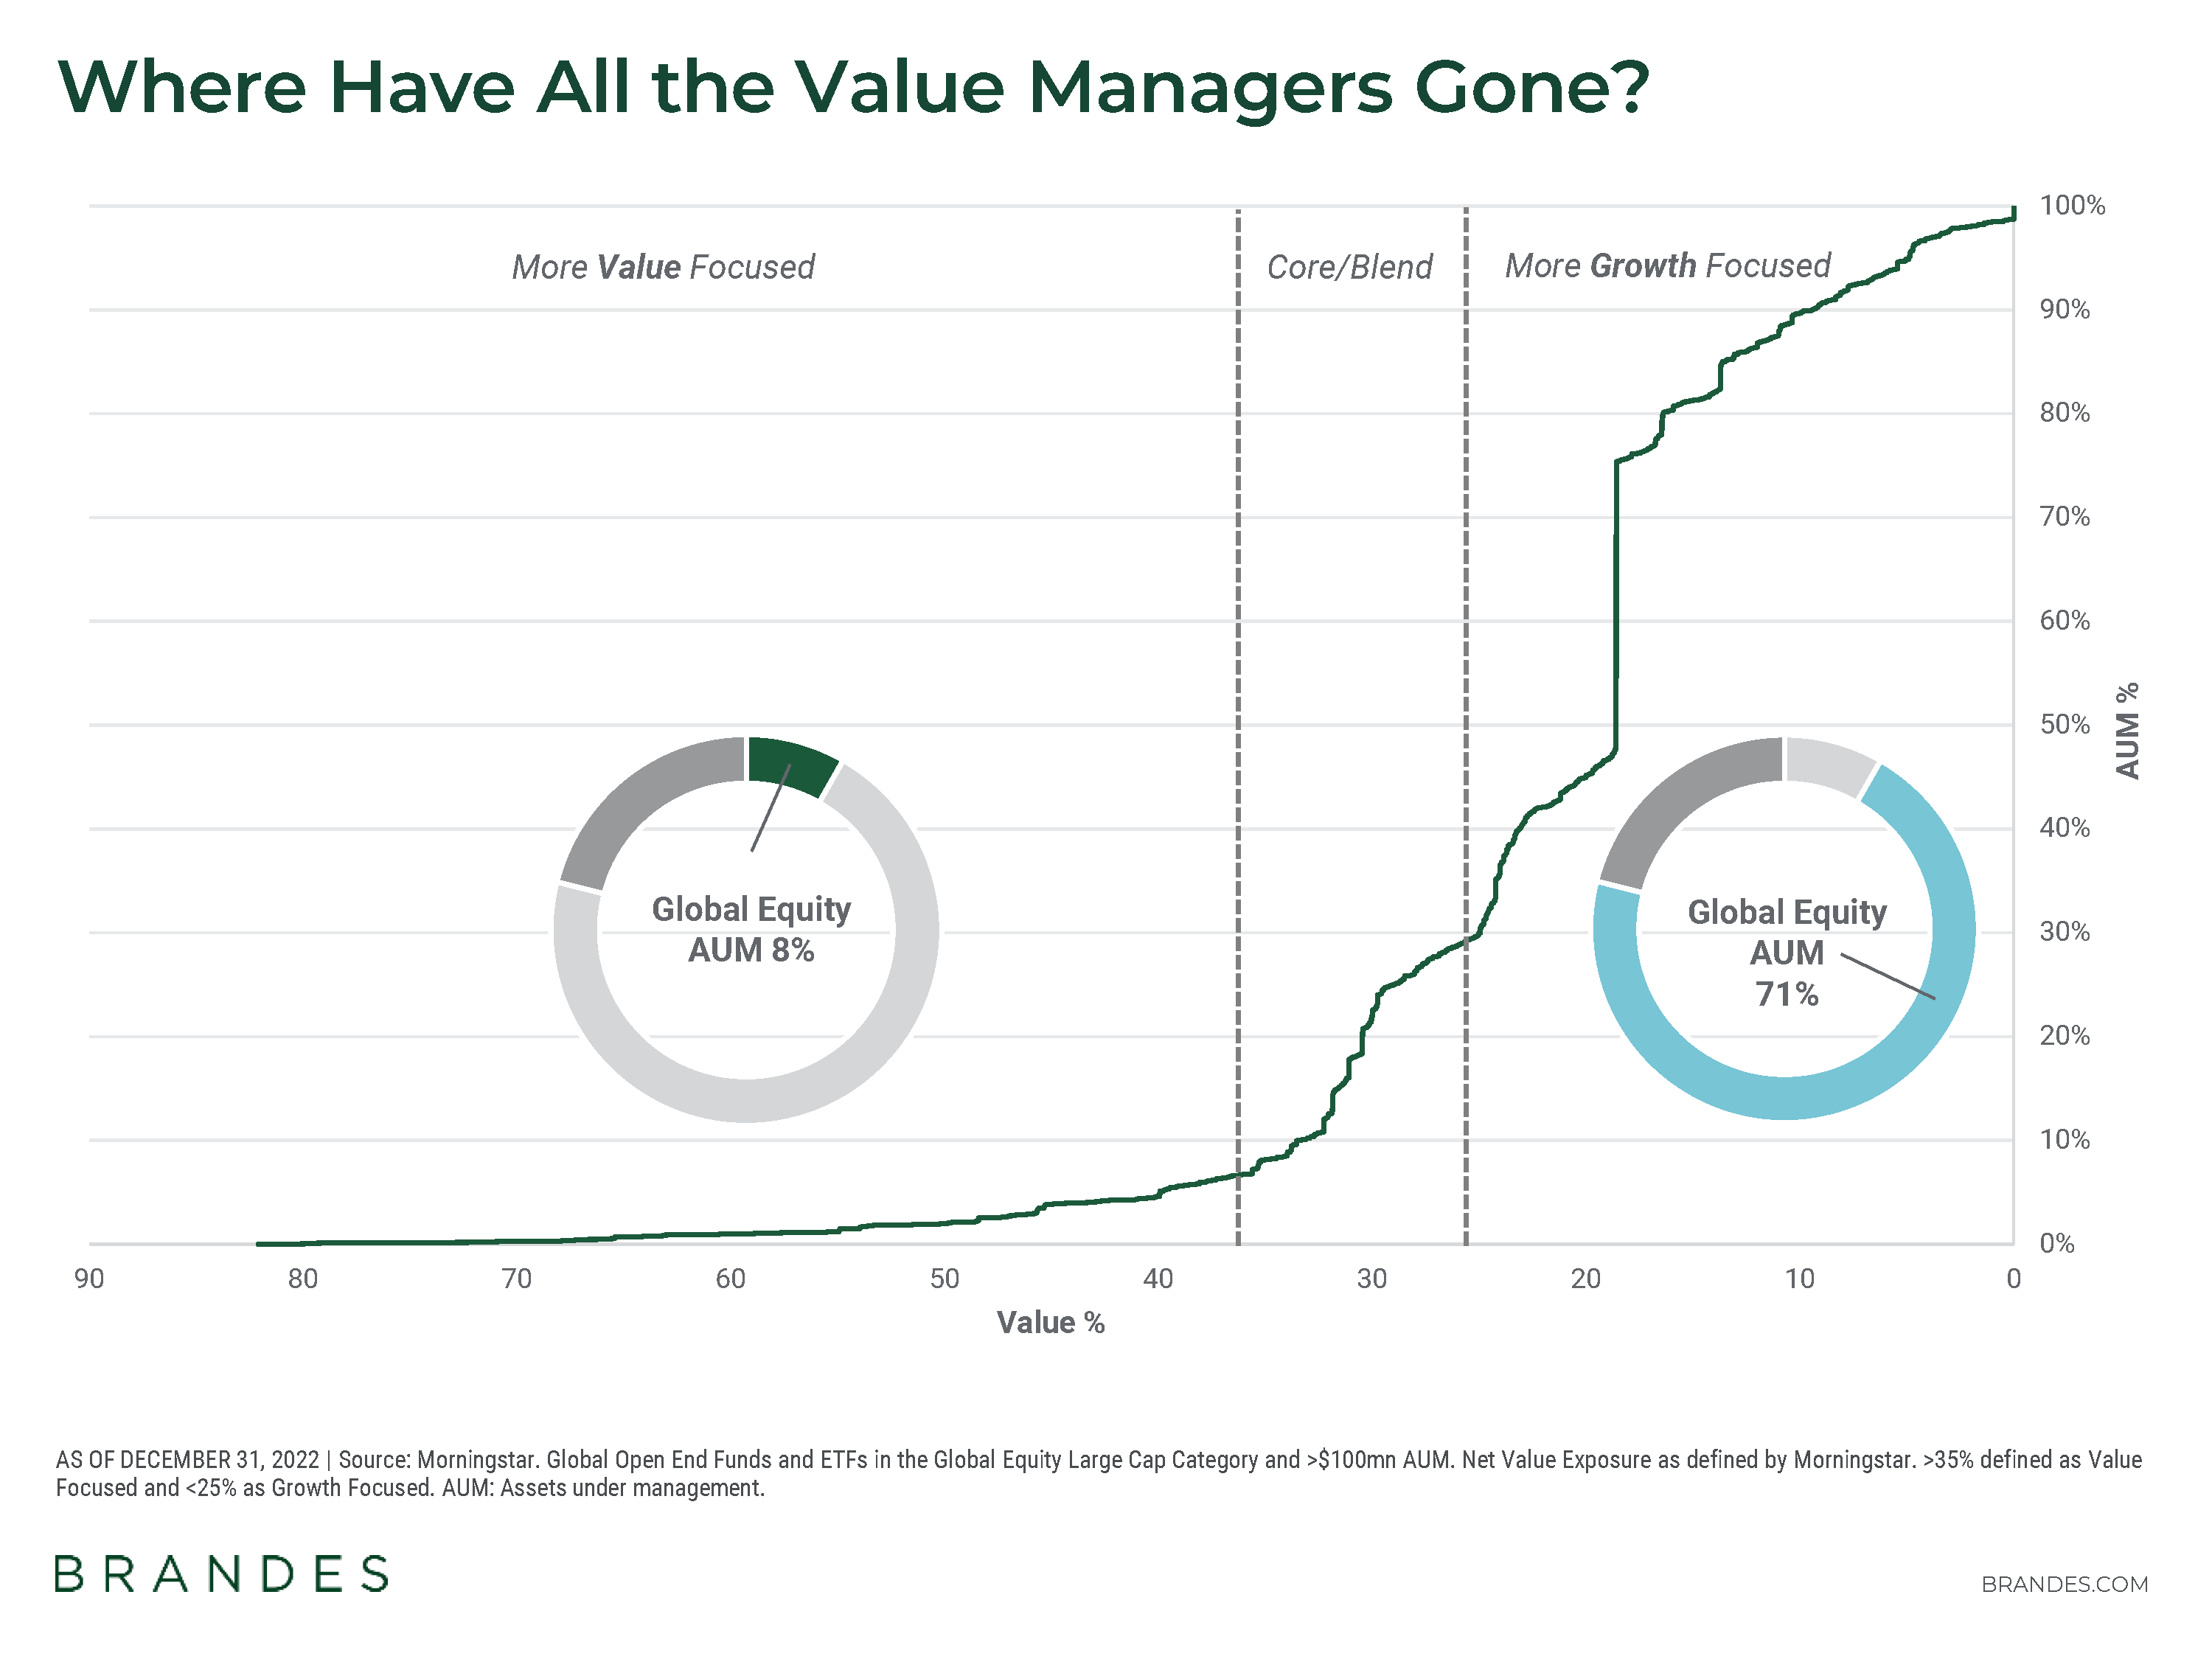 Where Have All the Value Managers Gone?